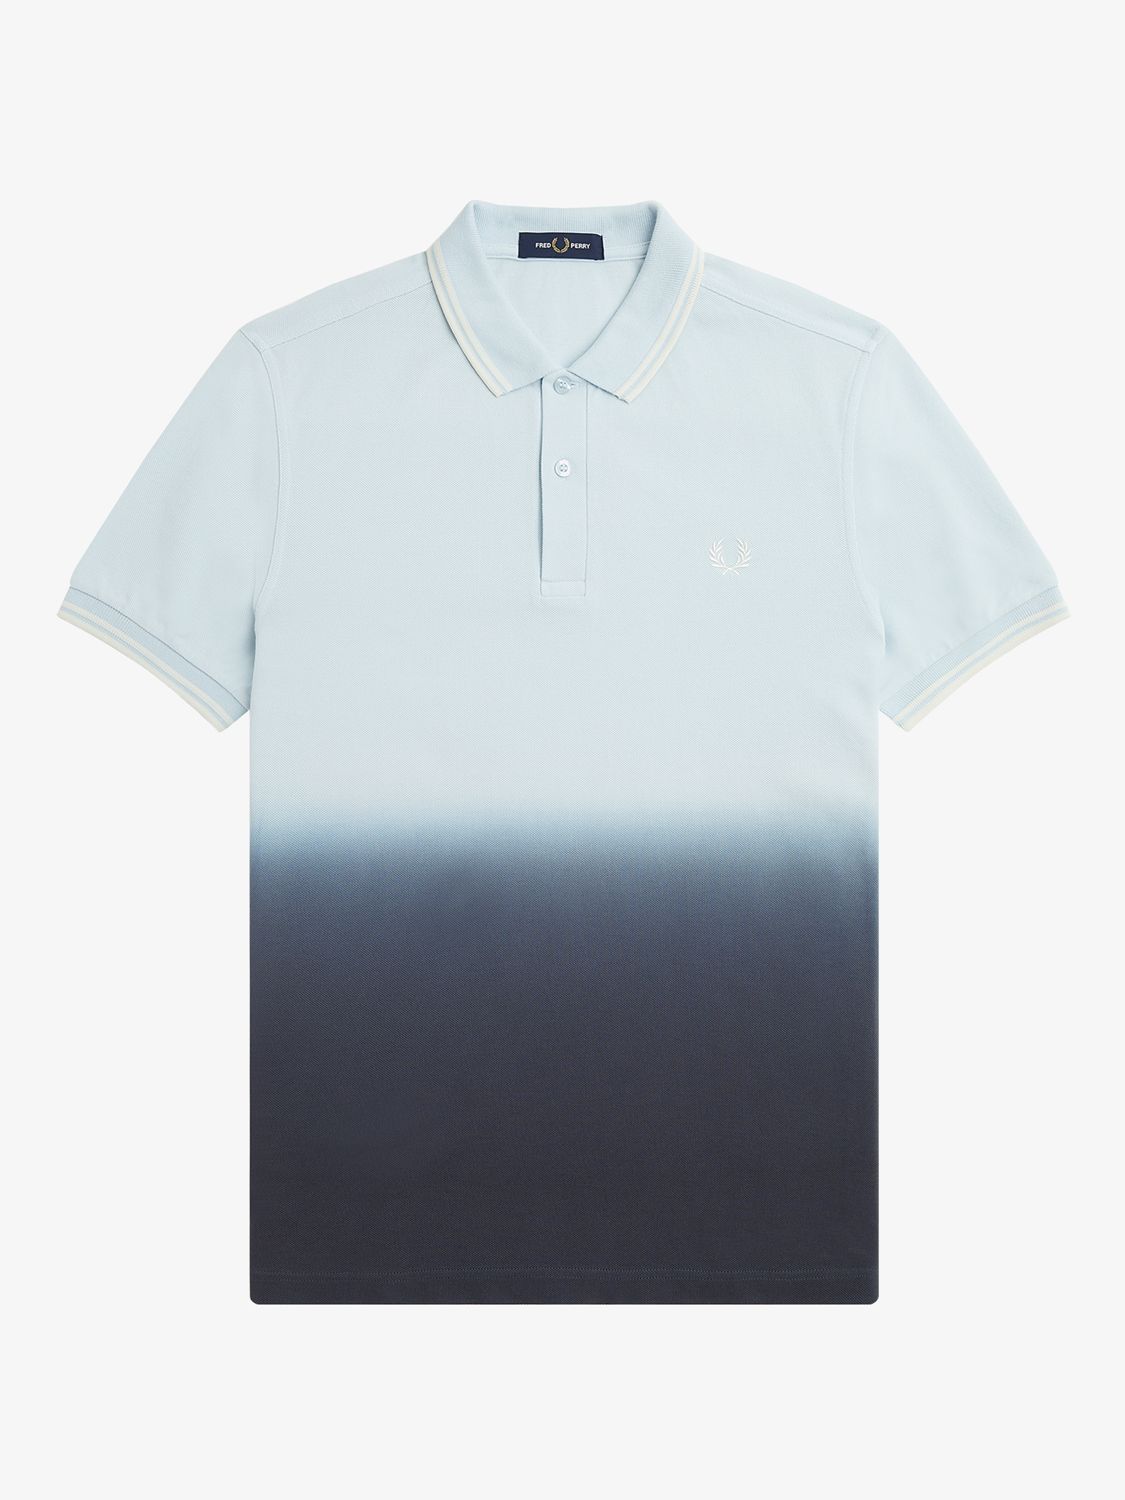 Fred Perry Ombre Polo Shirt, Light Ice at John Lewis & Partners